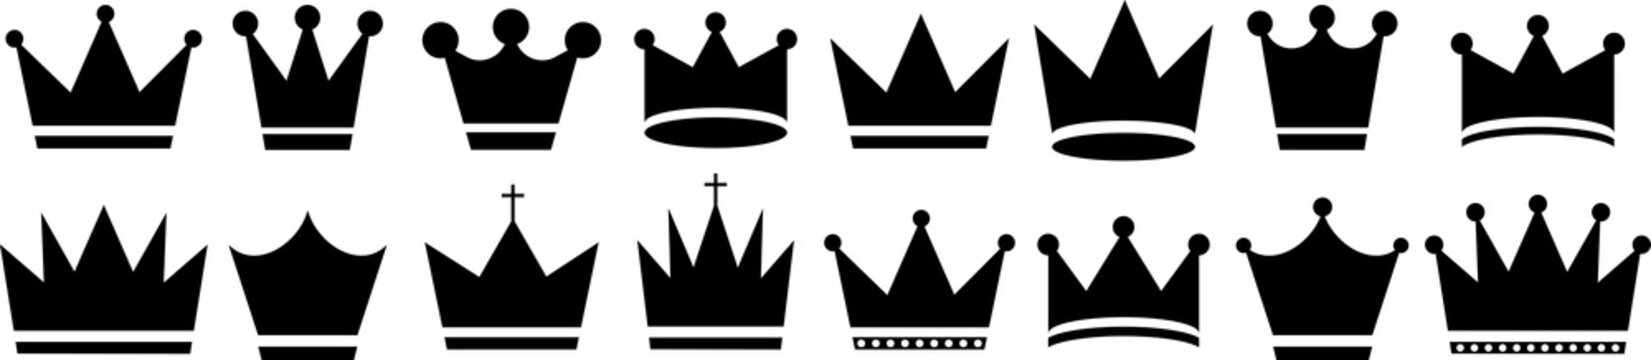 Royal Crown Vector Icons Set. Large Collection Of Crowns On Transparent Background. PNG Image